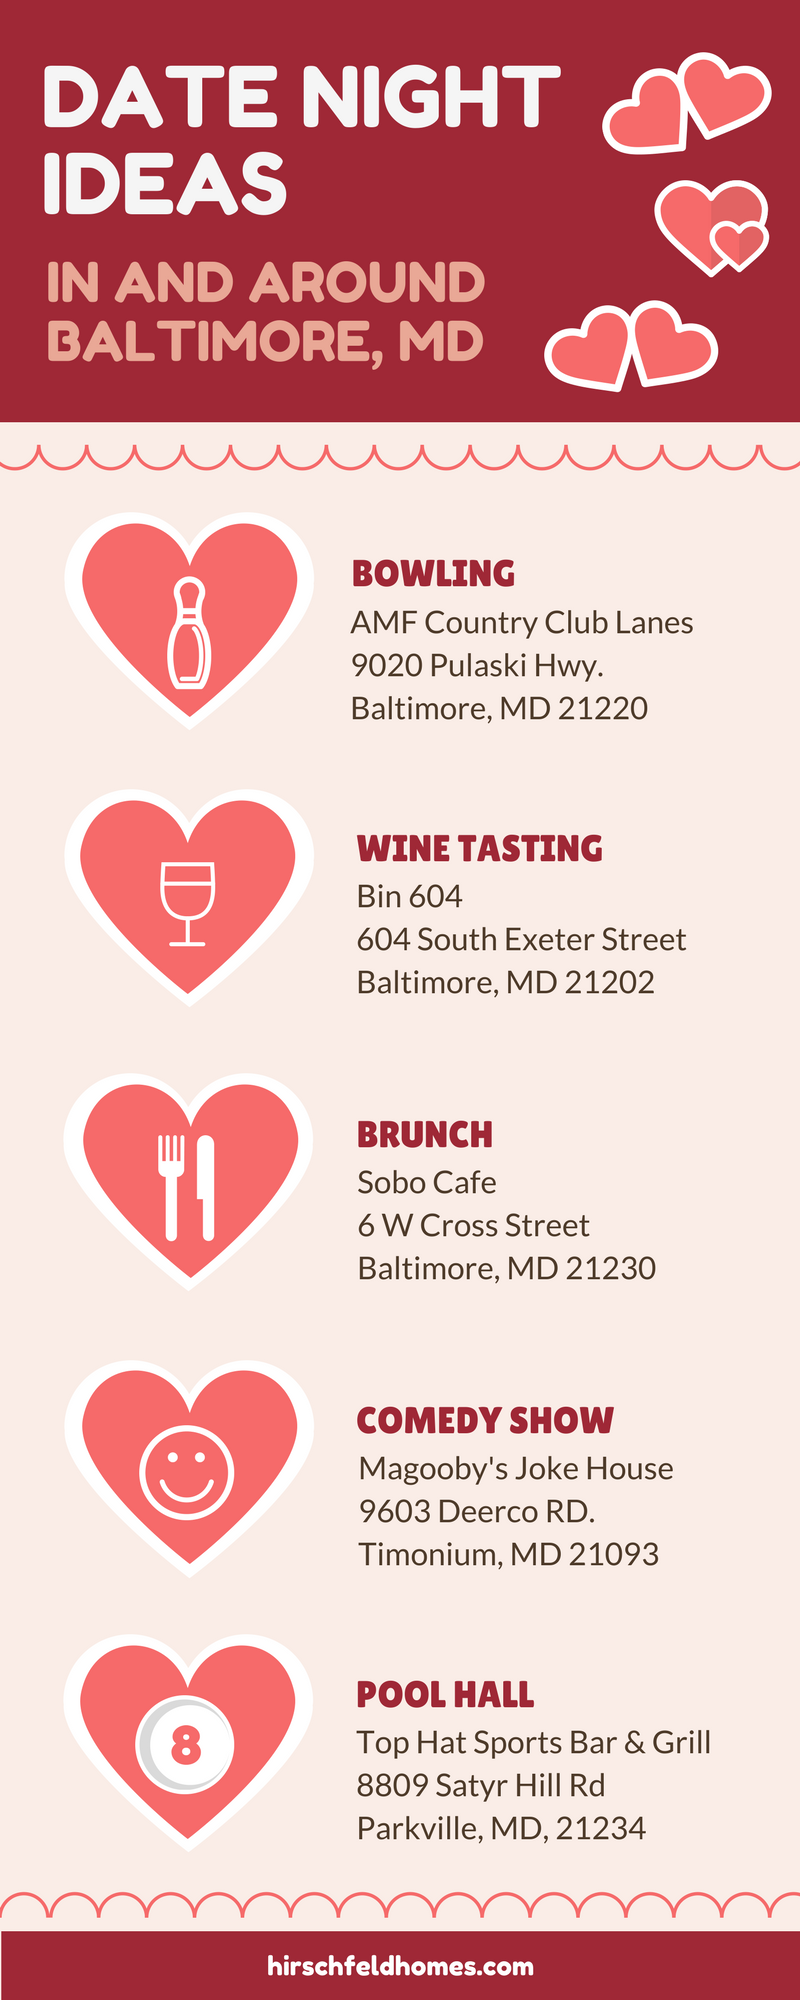 date night ideas in and around baltimore bowling wine tasting brunch comedy show and the pool hall